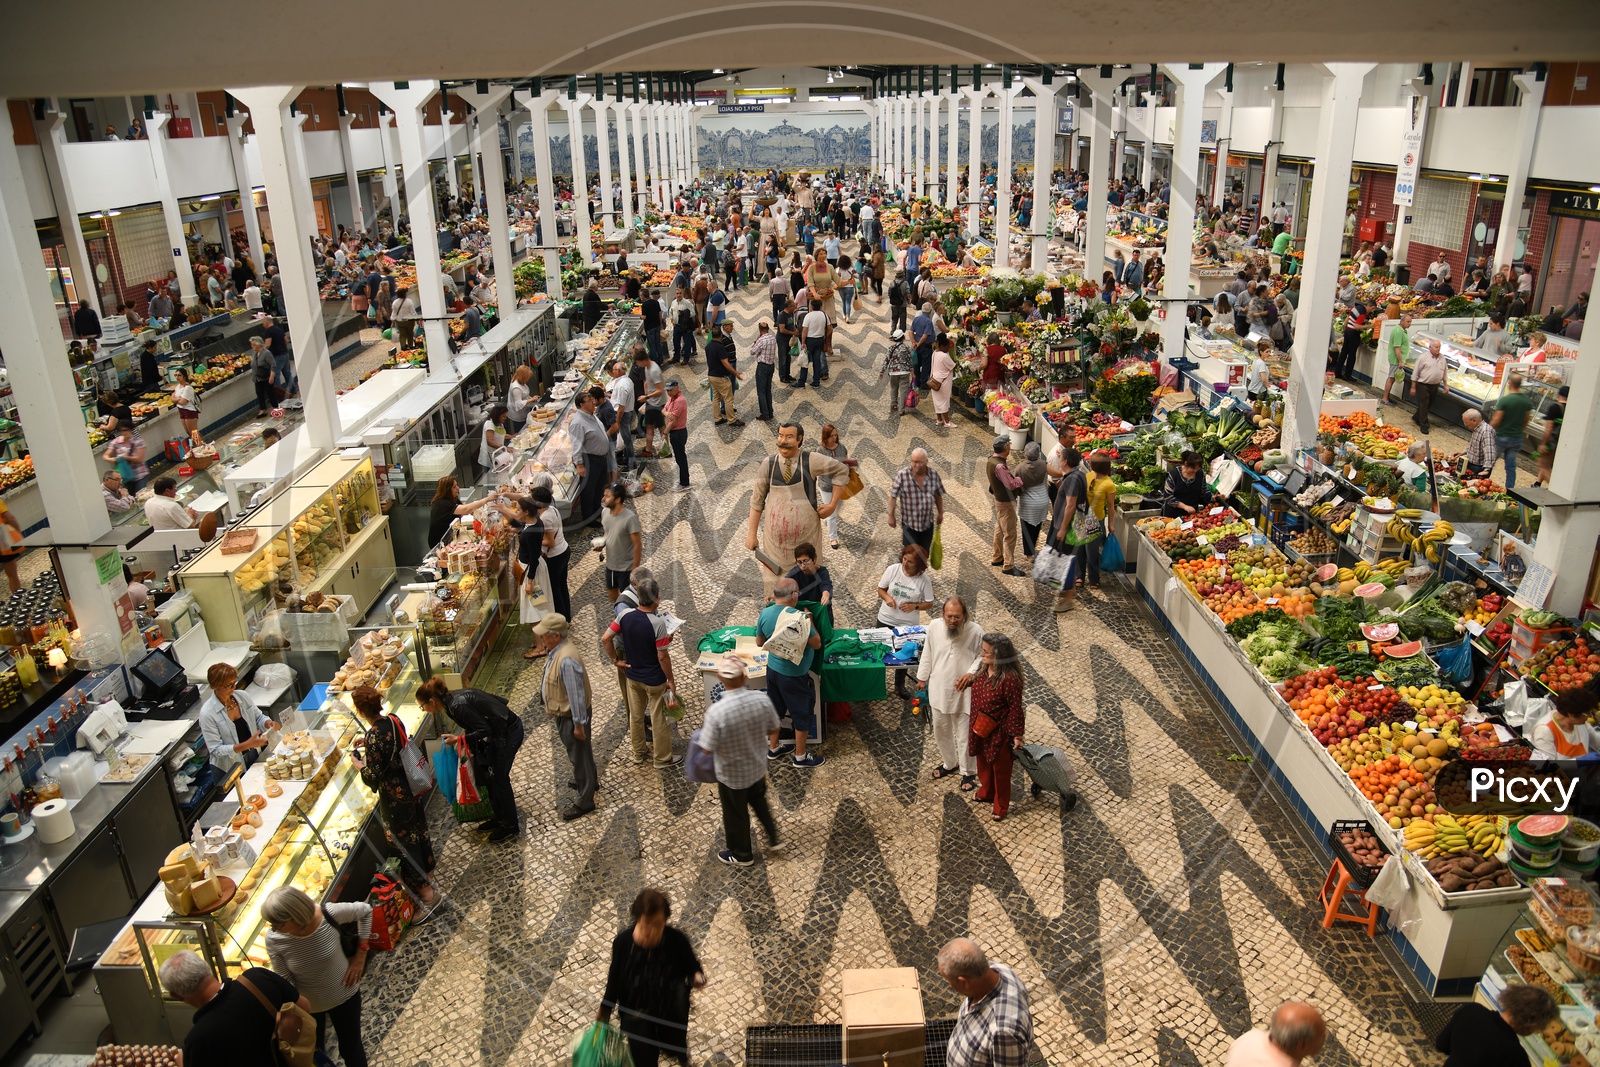 People Shopping for Groceries in a Market, Portugal